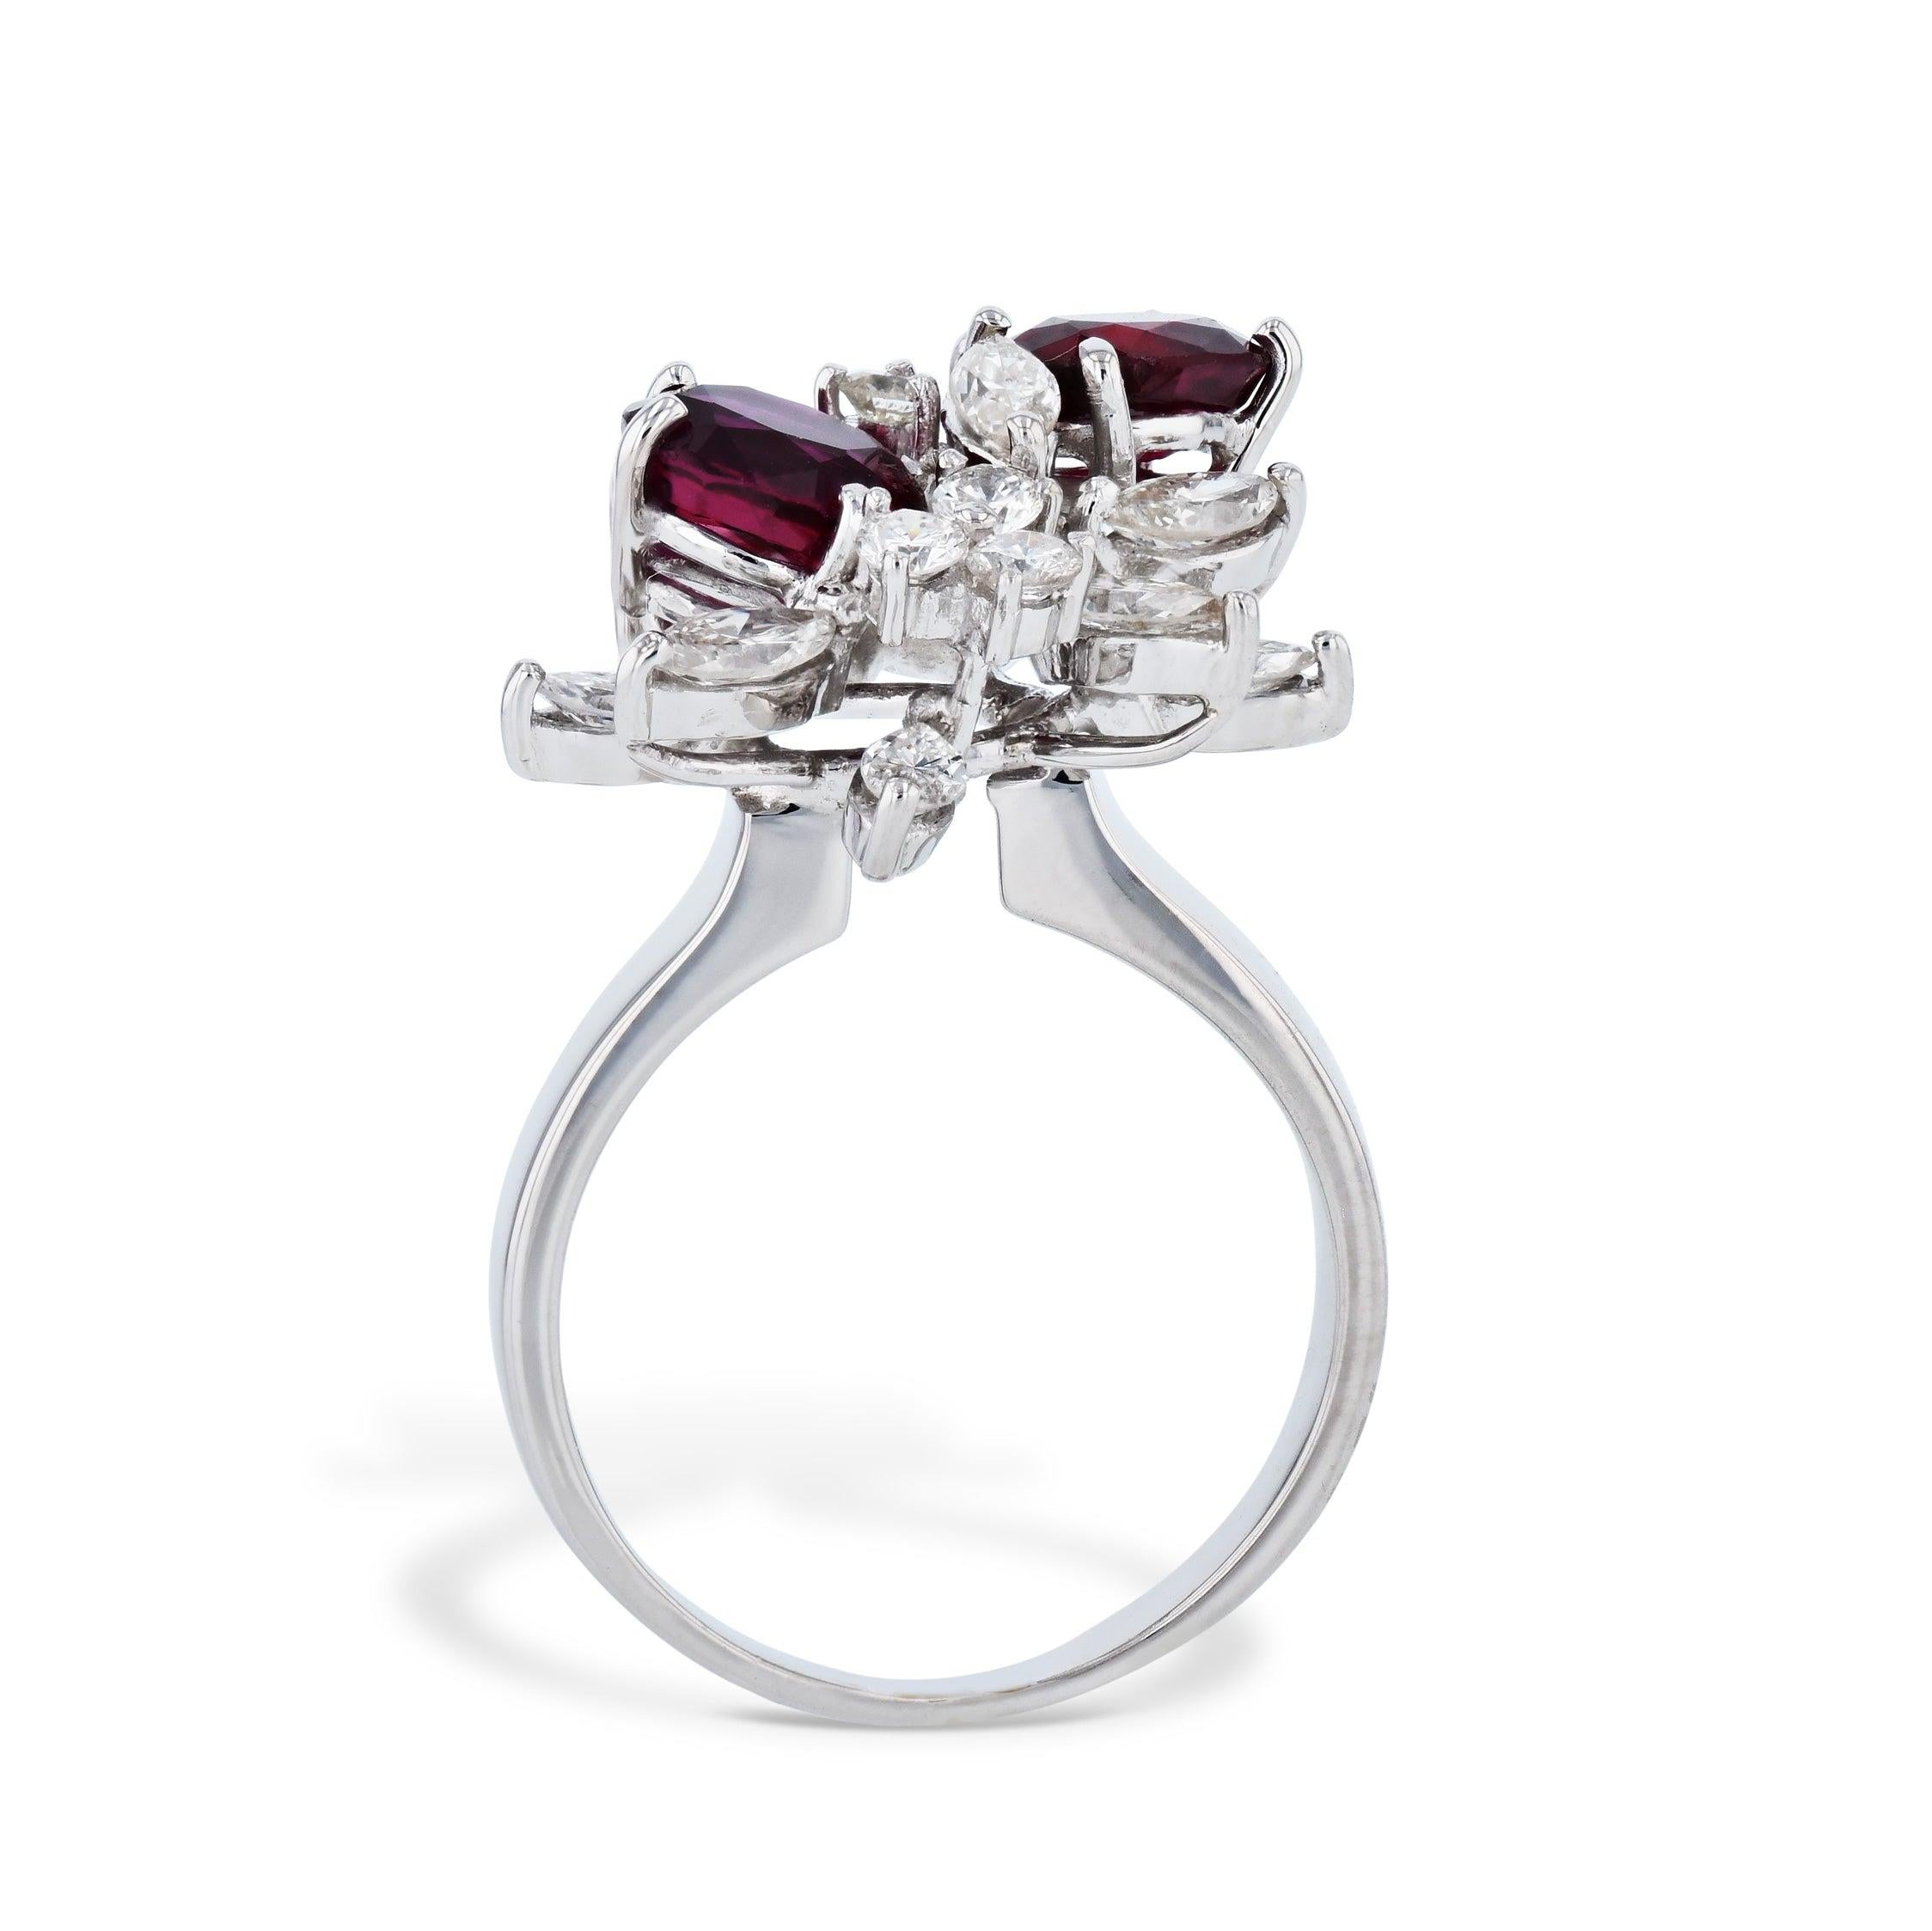 This exquisite 18kt White Gold Thai Oval Rubies and Diamond Estate Ring is sure to take your breath away! Featuring 3.45ct TW Oval Rubies and Round and Marquise Diamonds - this stunning piece is sure to be treasured for years to come! Add this